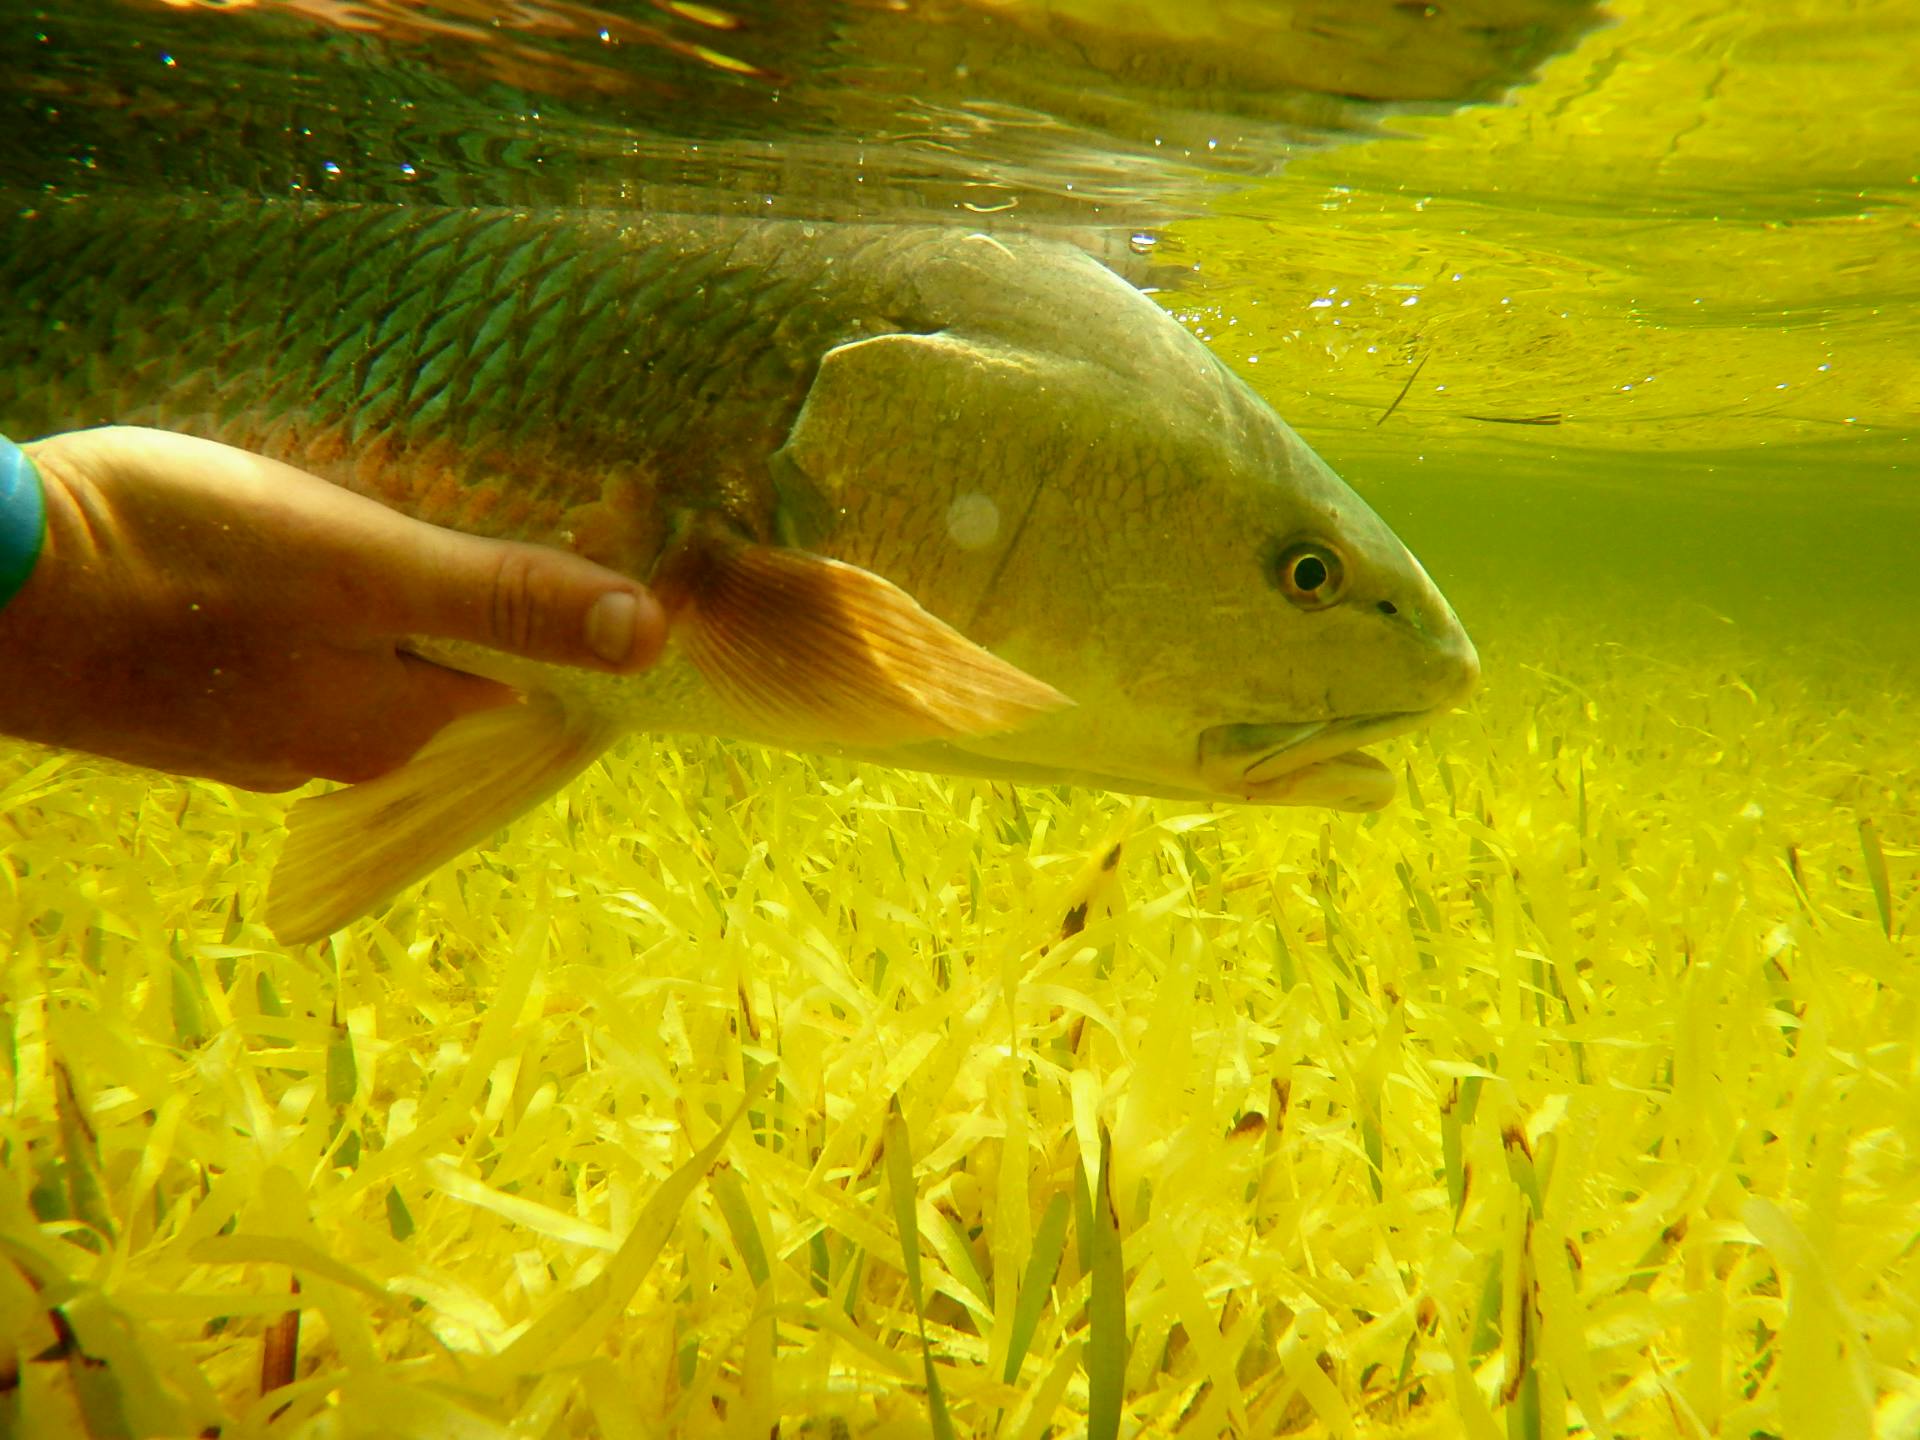 The author's underwater image of him holding a fish right below the surface of the water, with his hand and the fish's belly close to the seagrass on the bottom. 